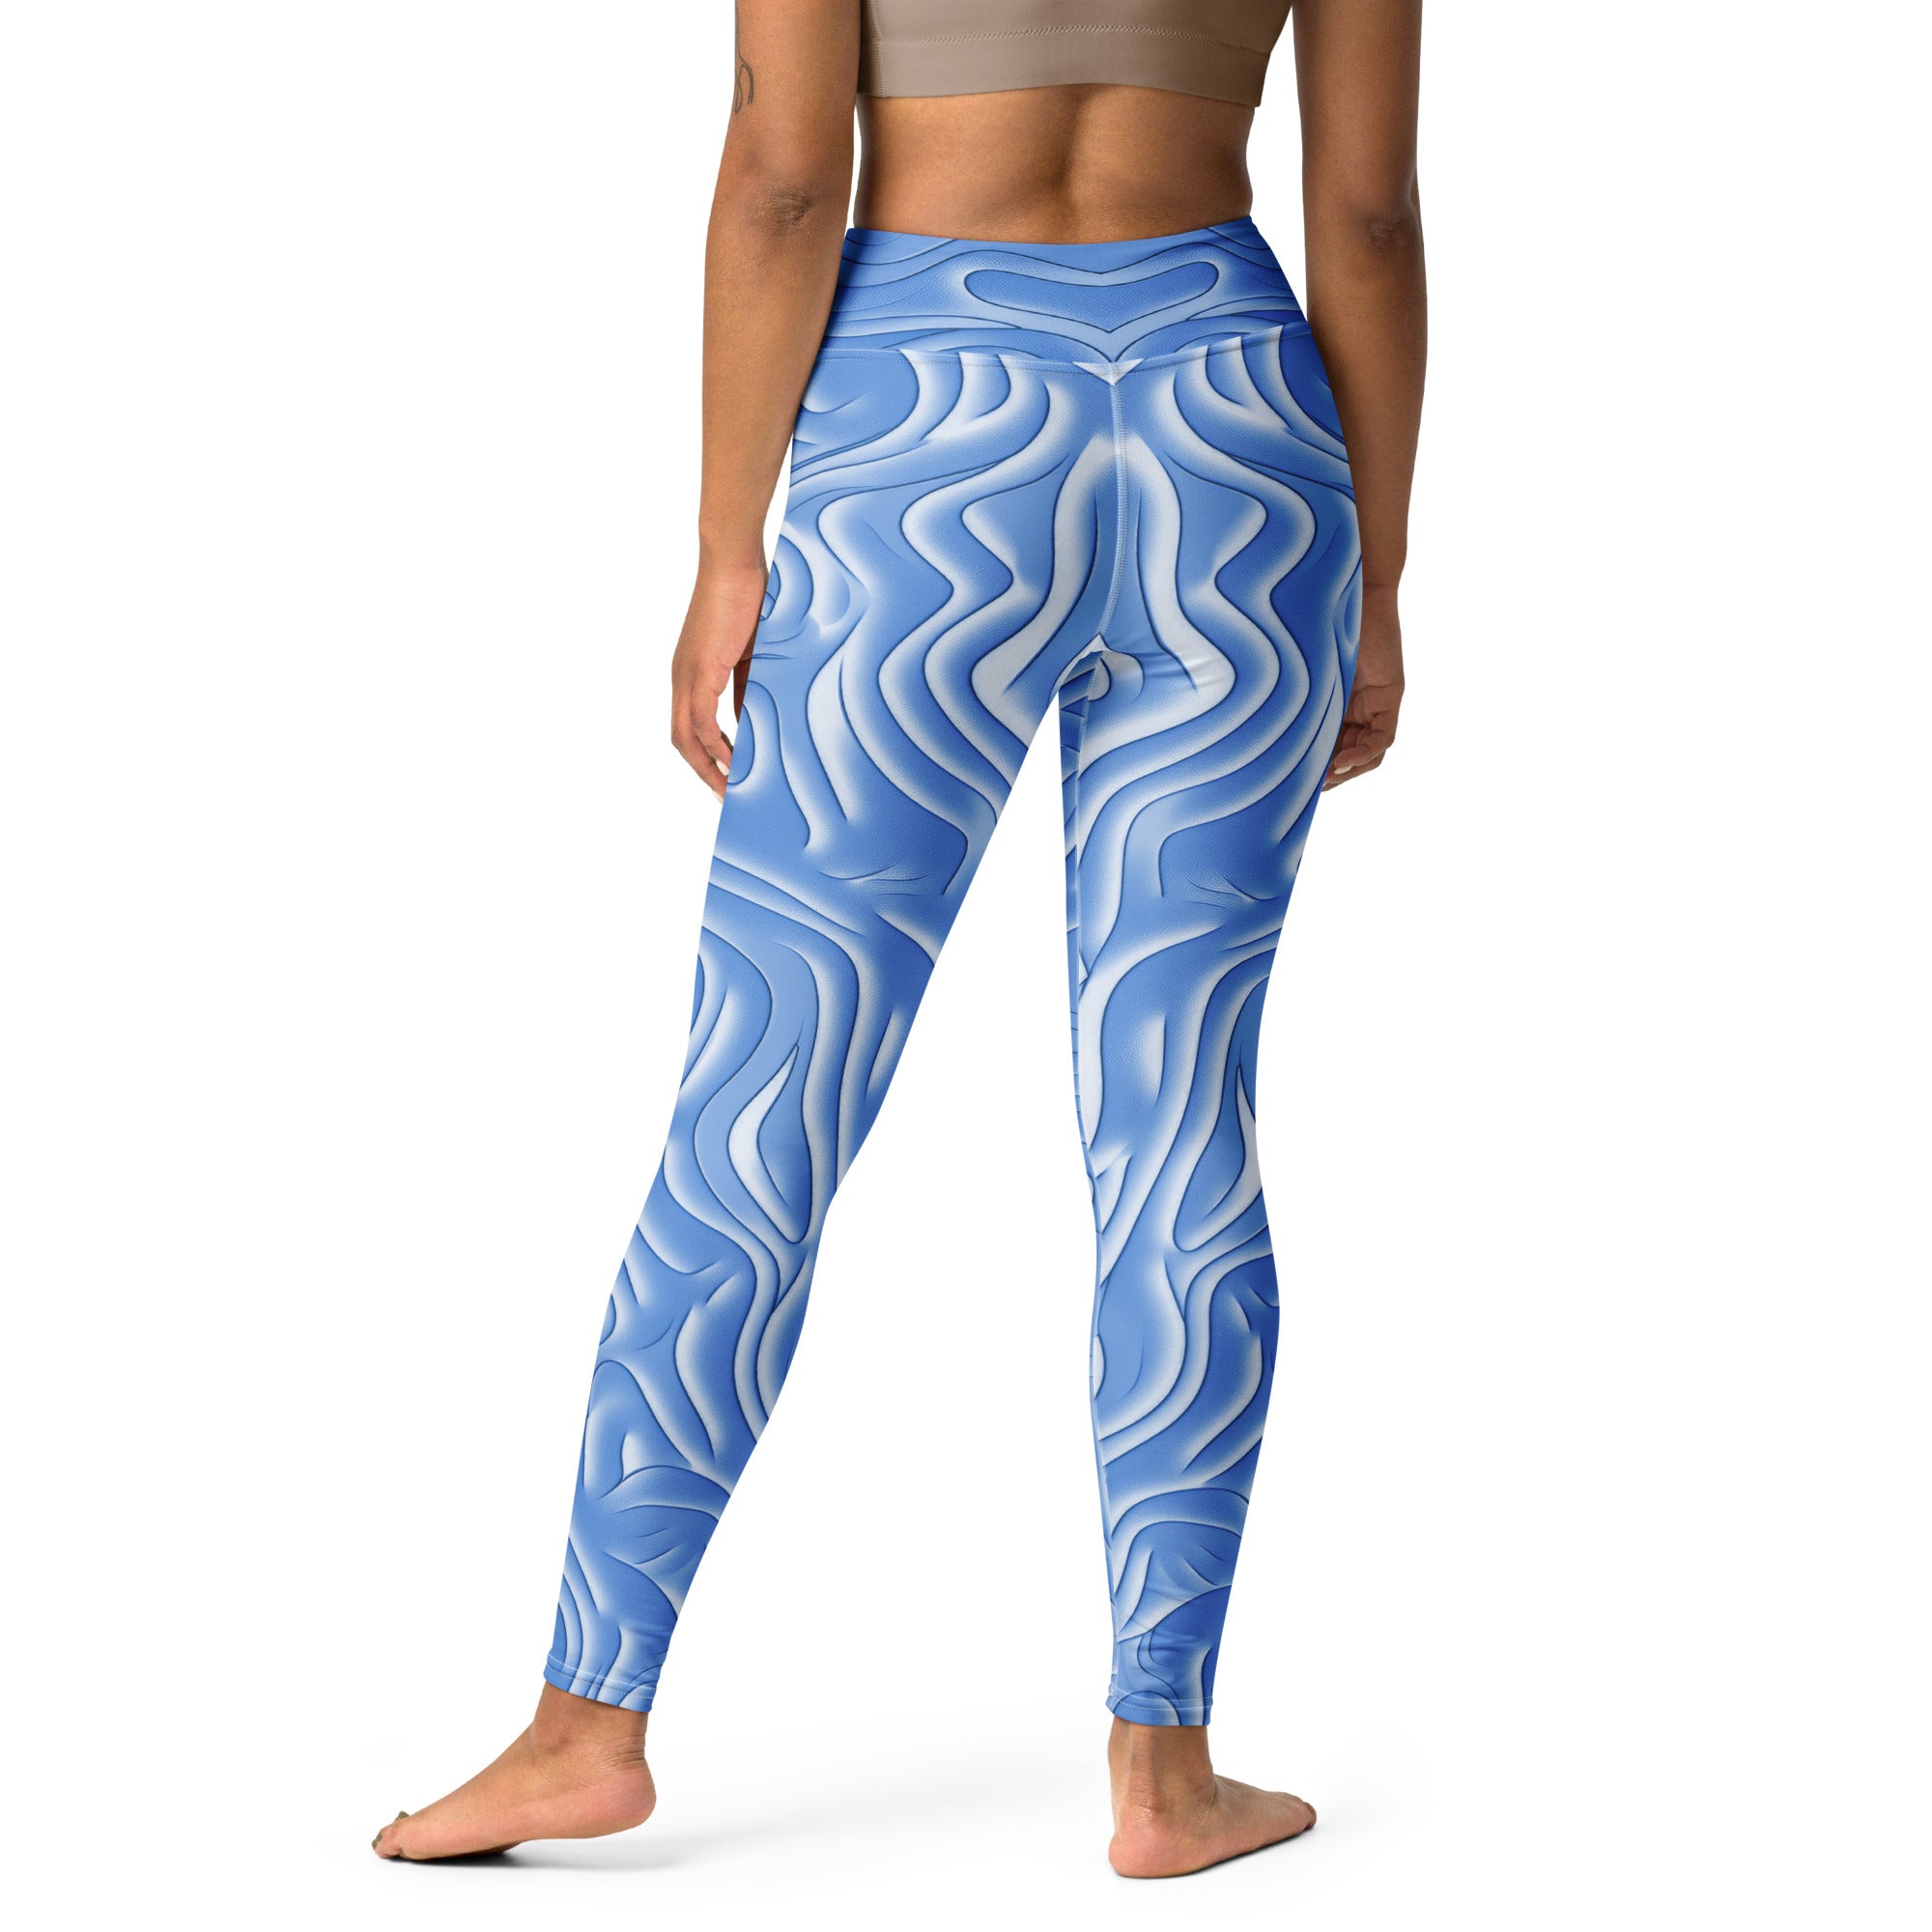 Electric Dreams All-Over Print Yoga Leggings on a clothing rack